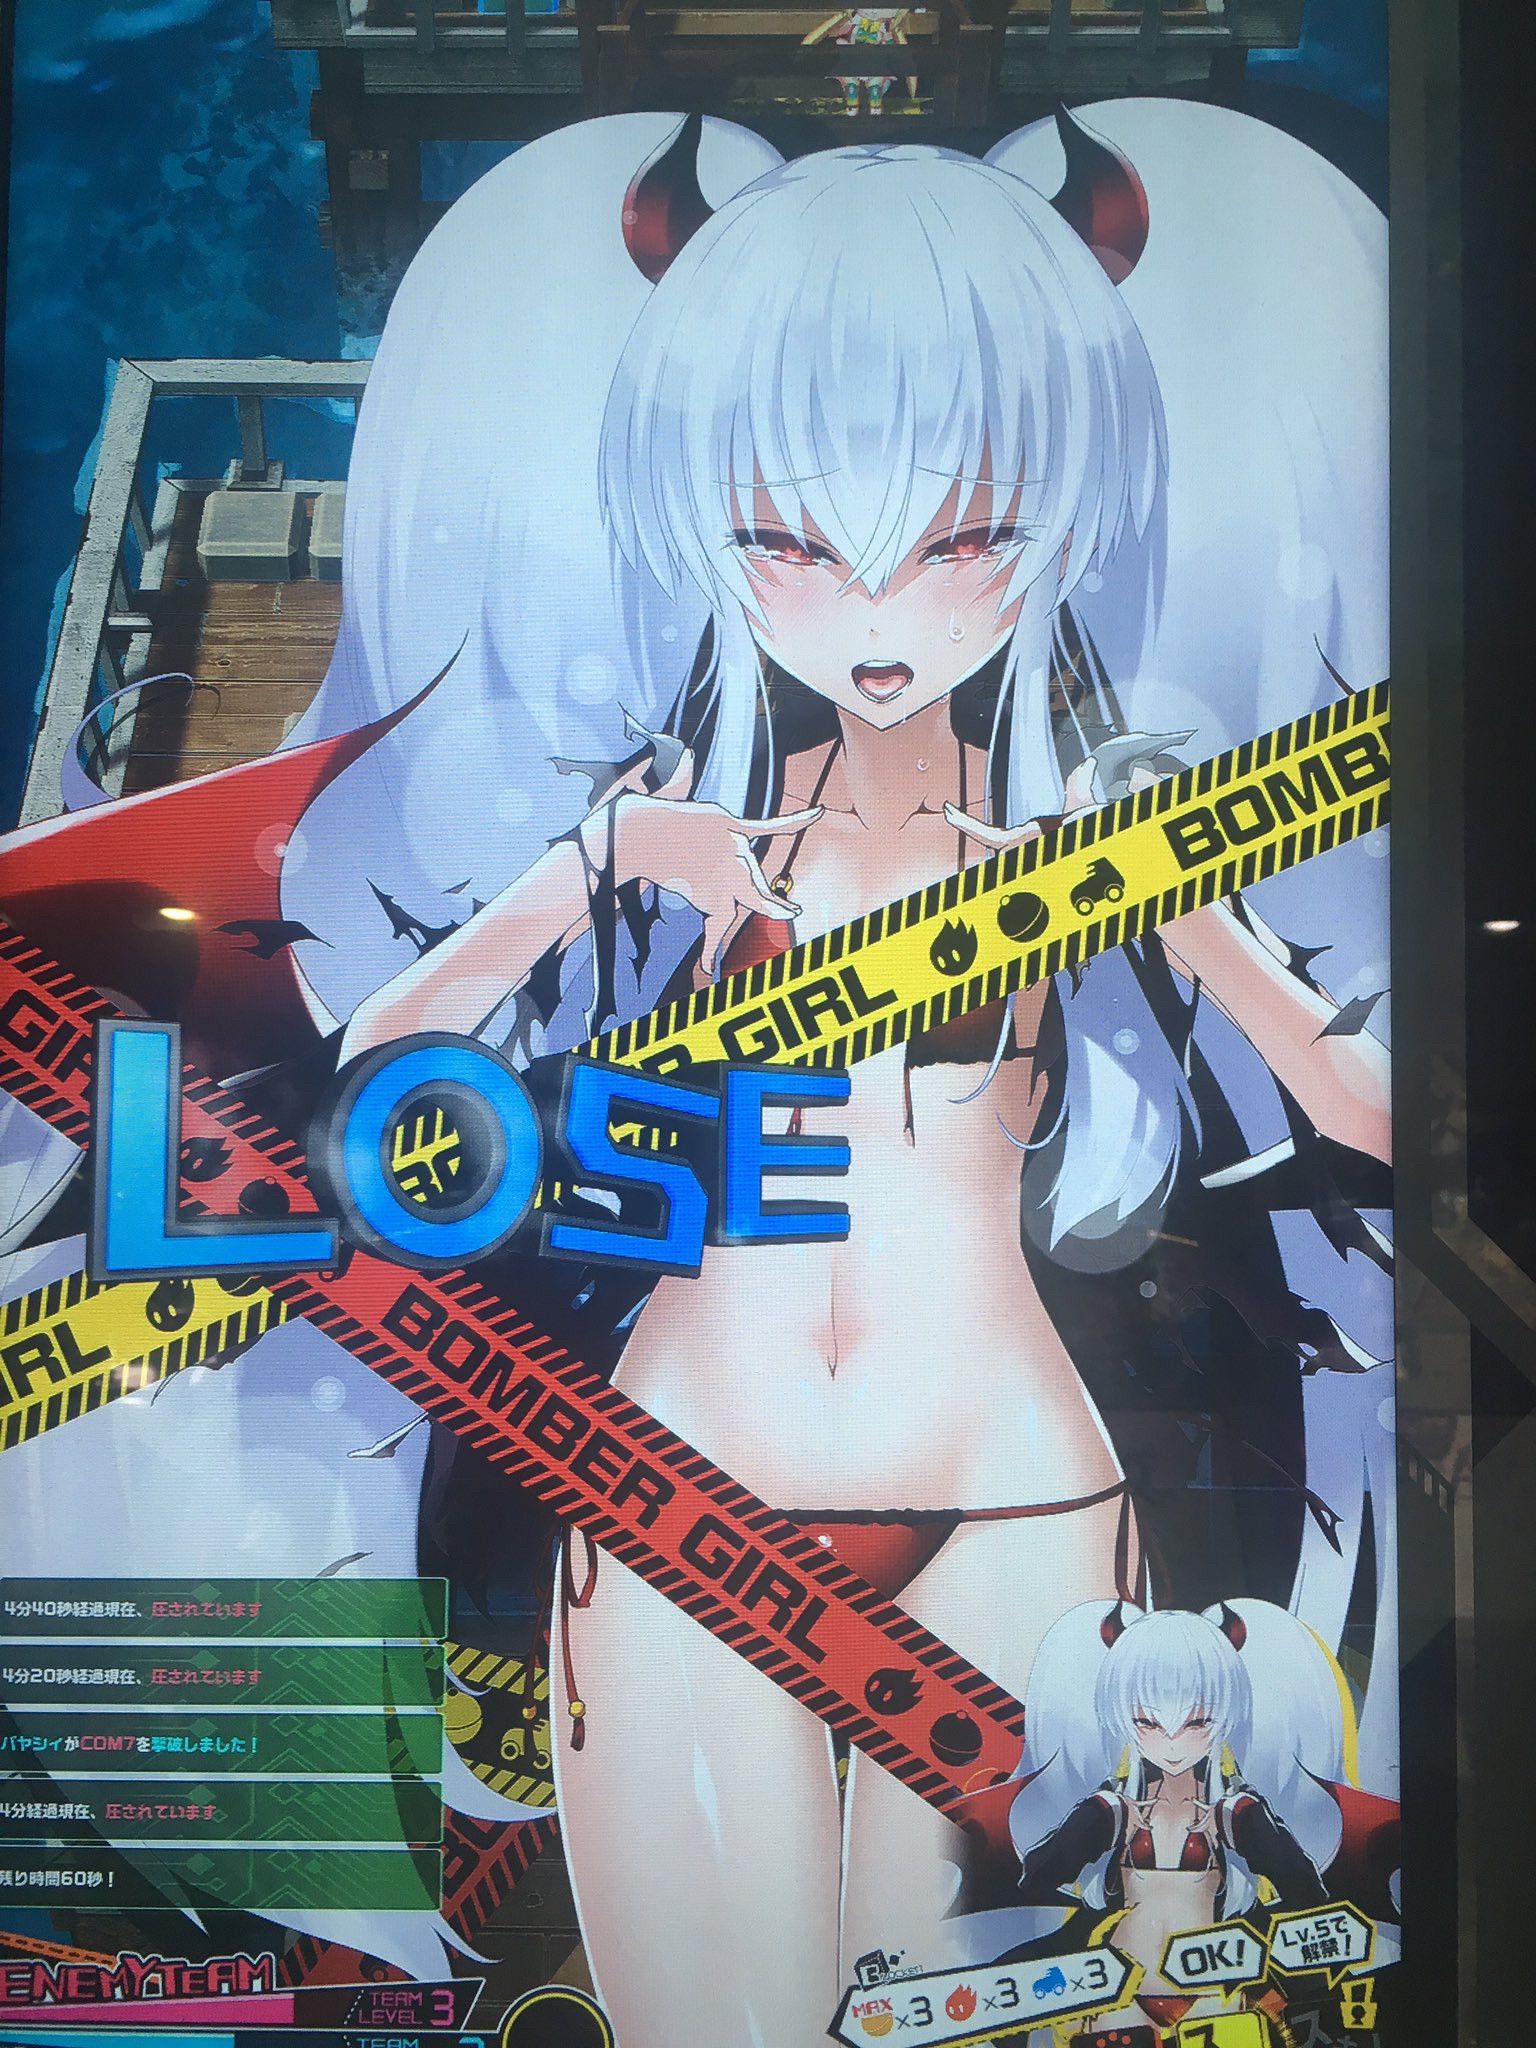 [Good news] Bomber Girl's new costume erotic too! This is already Eroge, isn't it www? 4